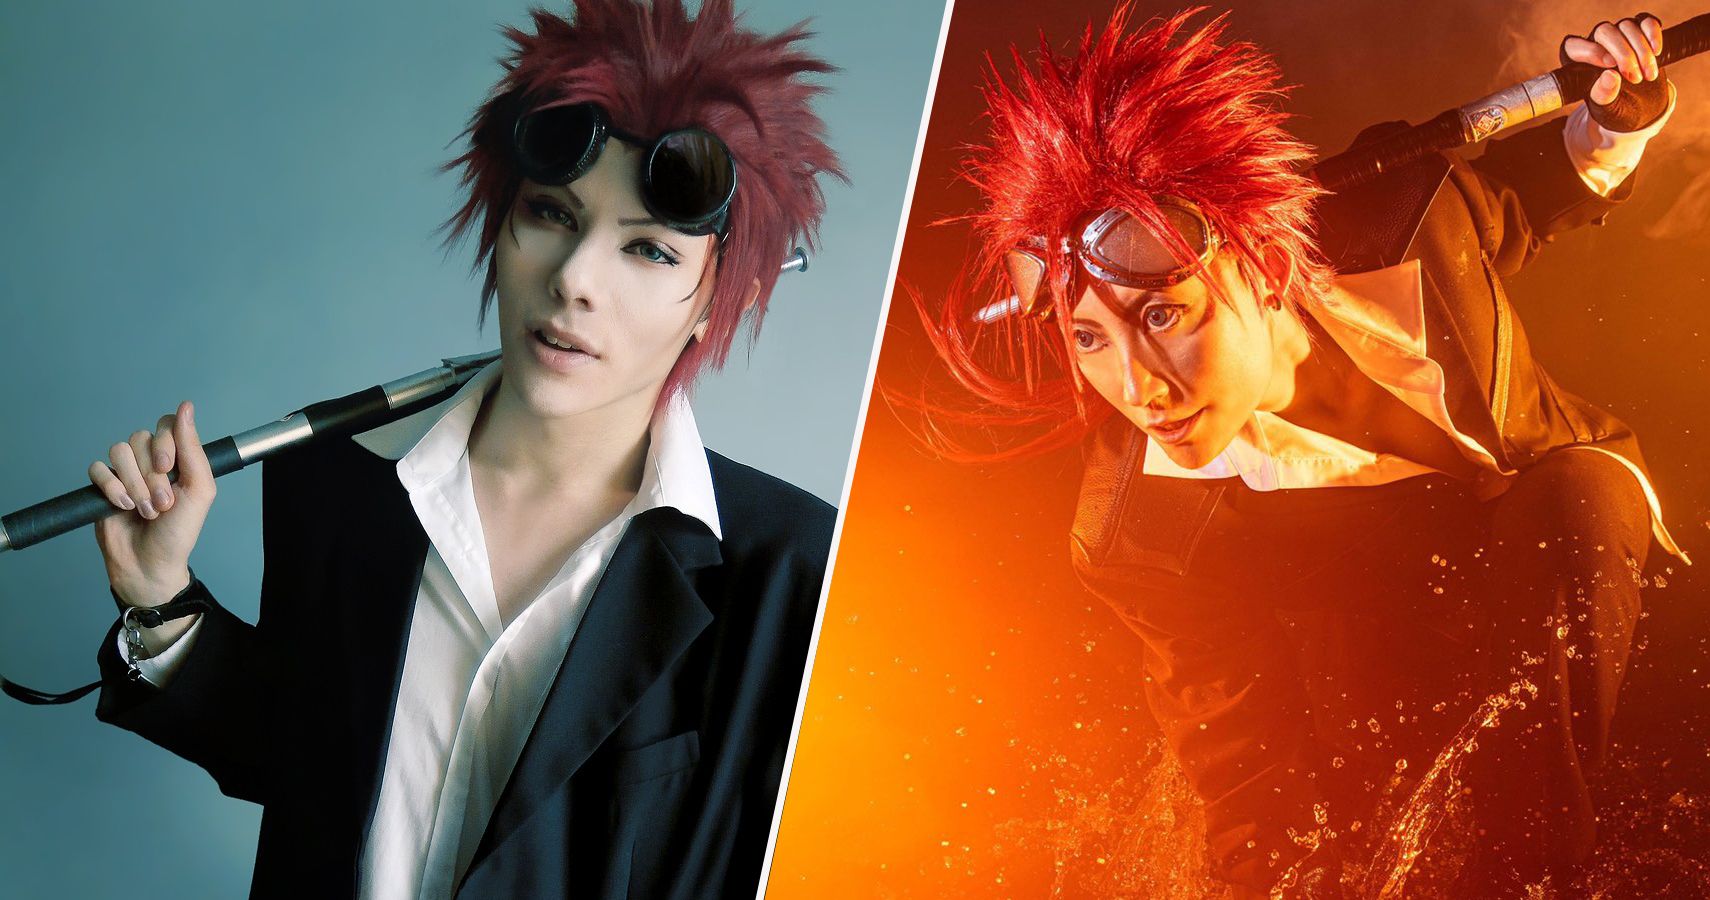 Final Fantasy 7: 10 Reno Cosplays That Would Make The Turks Proud